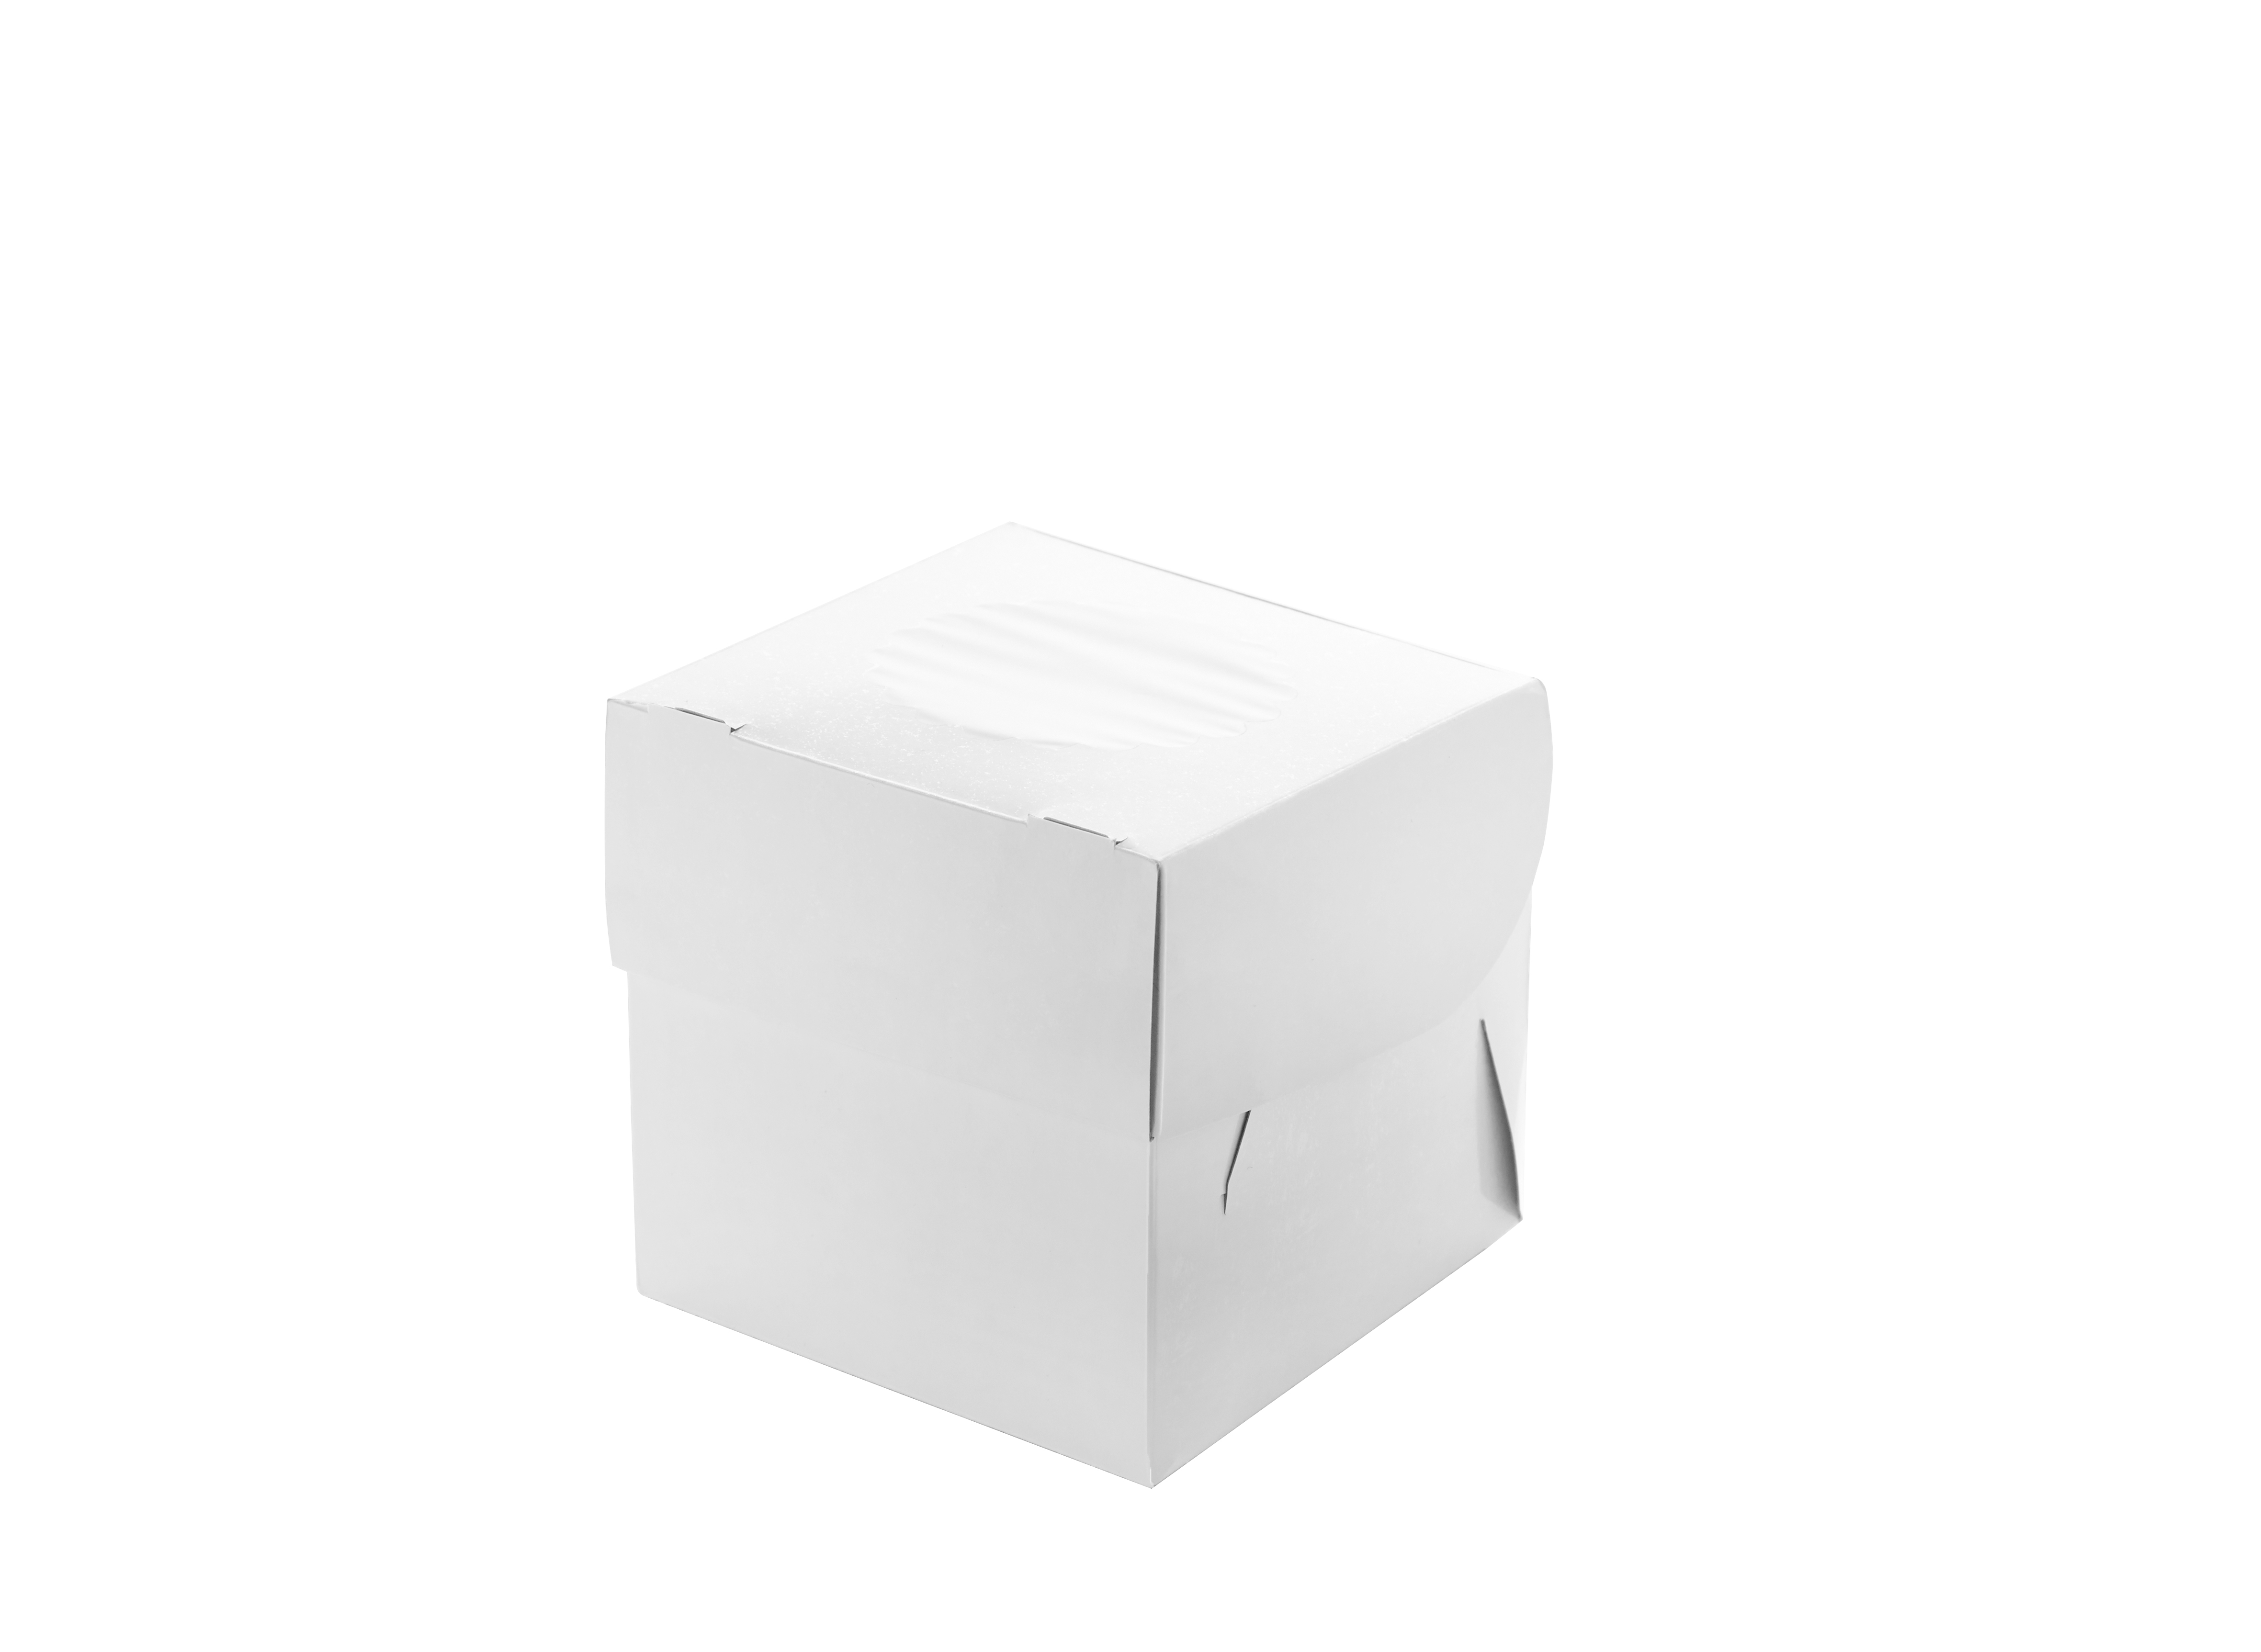 OSQ MUF 1 boxes for muffins